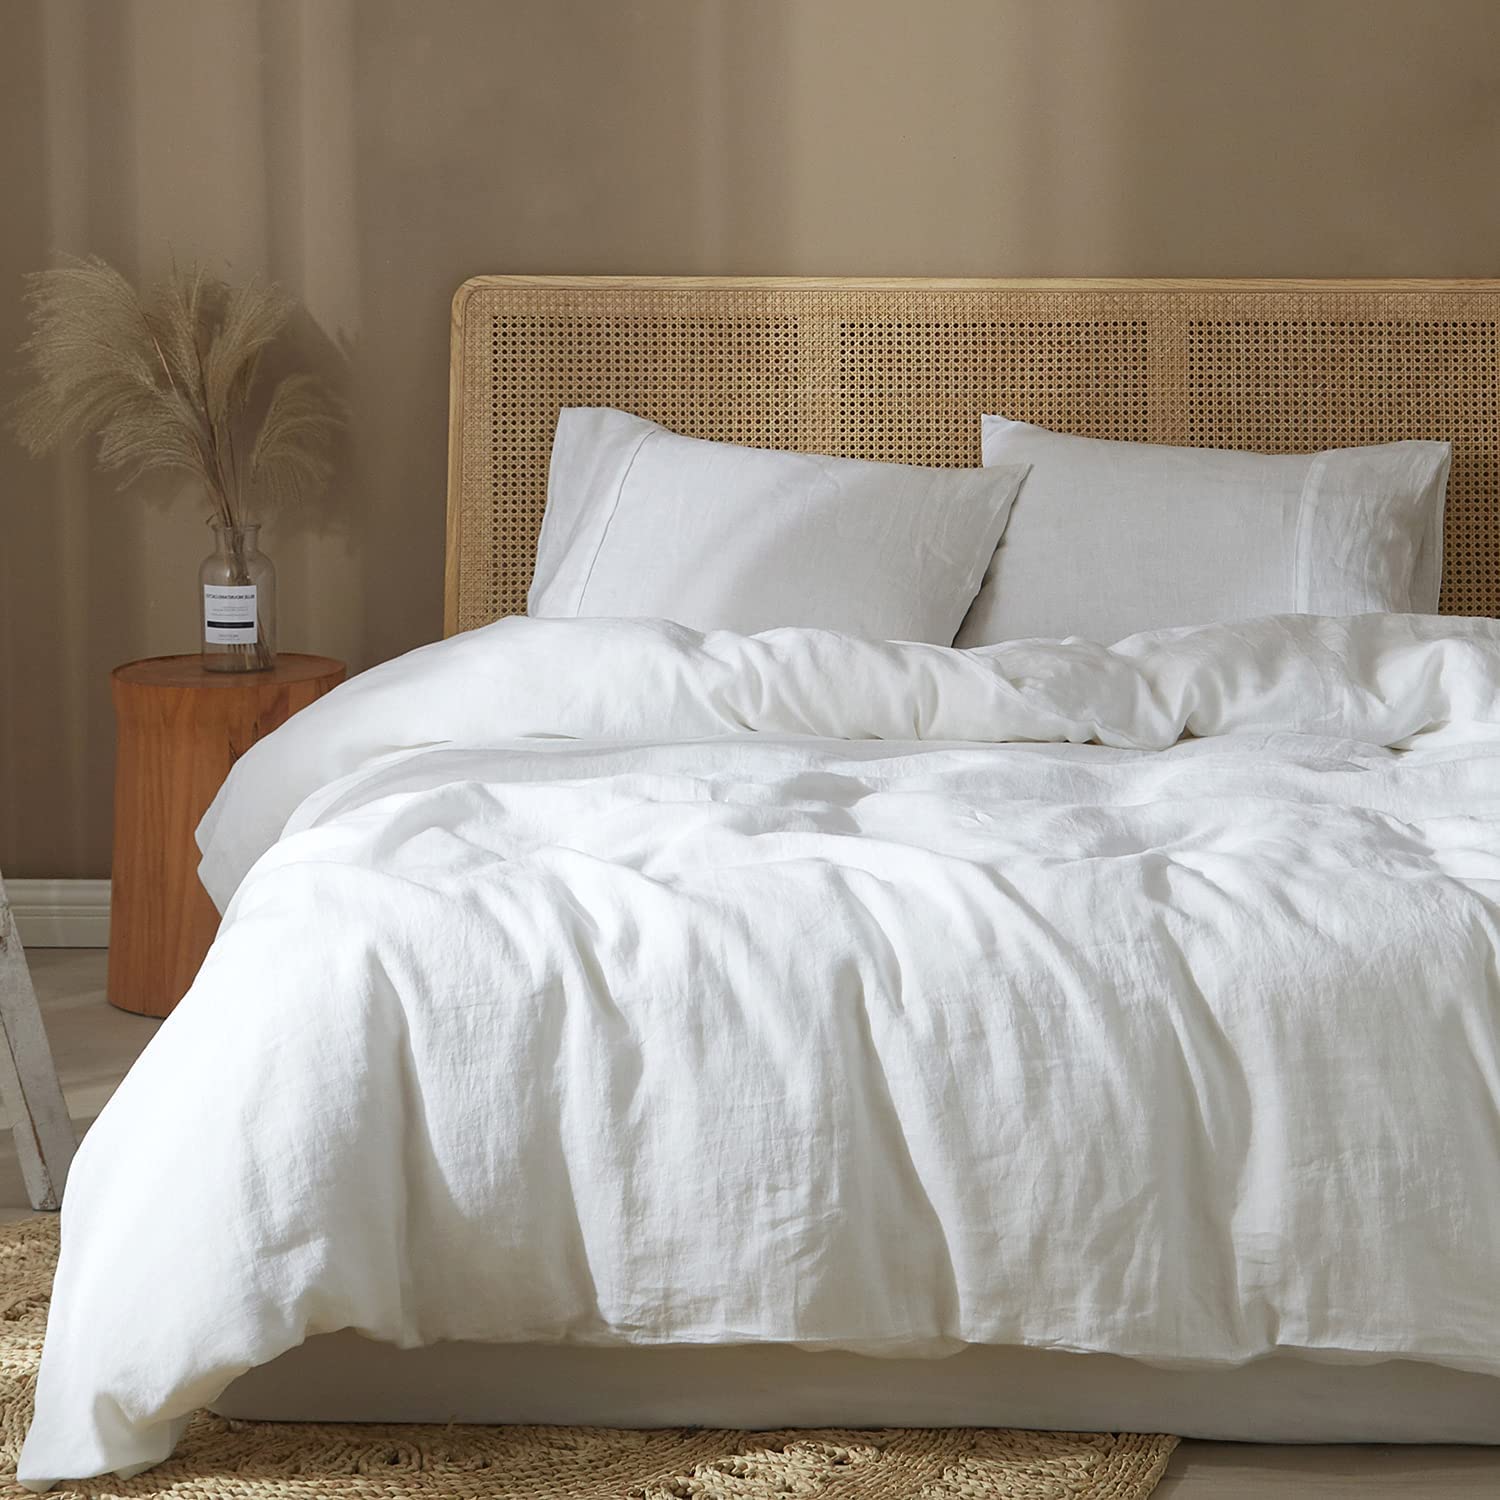 Price:$75.99  100% Pure French Linen Duvet Cover with Stone Washed, Ultra Soft and Cooling Linen Bedding Duvet Cover Set Queen Size Off White, Moisture-Absorbing & Breathable (No Comforter or Insert) : Home & Kitchen